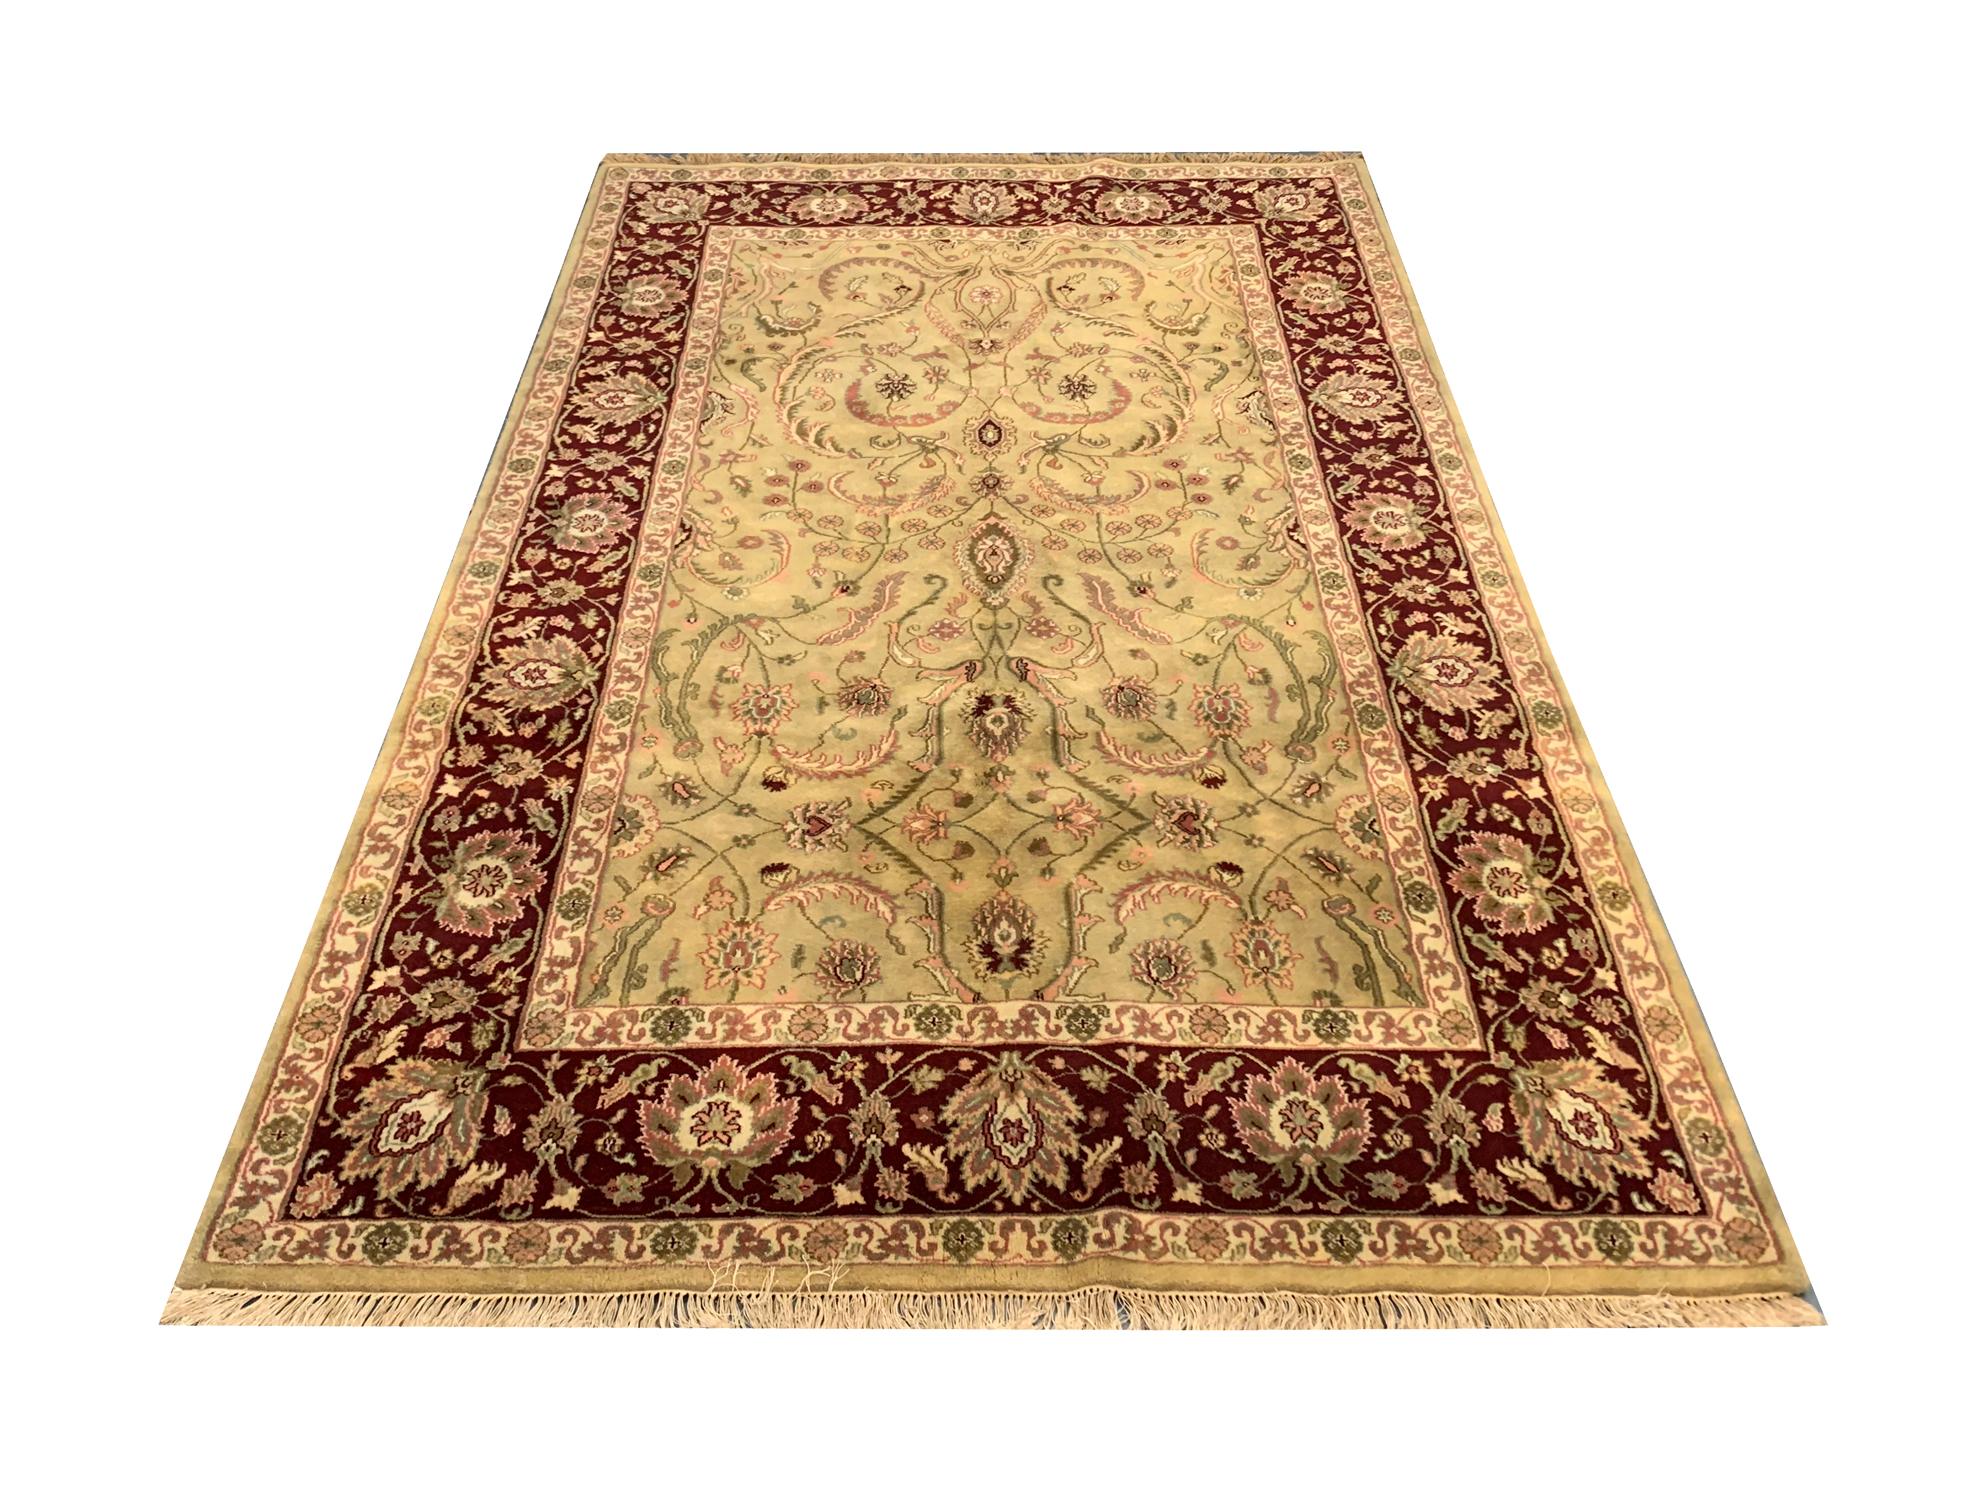 This fine wool oriental carpet is a vintage Ziegler rug woven by hand in India at the end of the 20th century, circa 1990. The central design features an elegant symmetrical pattern with delicate floral patterns woven in subtle accent colours